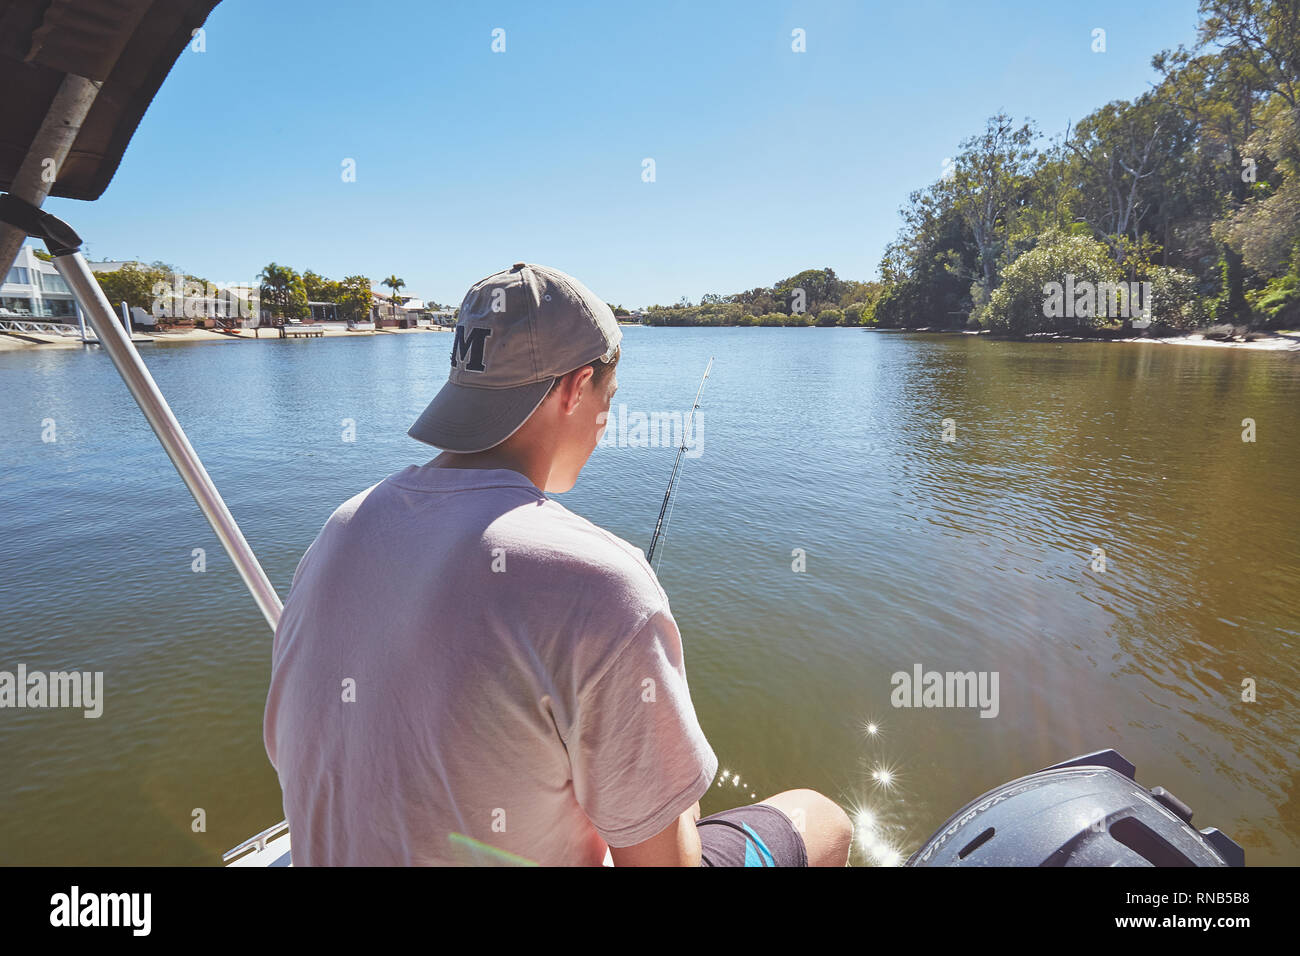 Teenage male on a small boat, fishing, on a river in Queensland, Australia Stock Photo